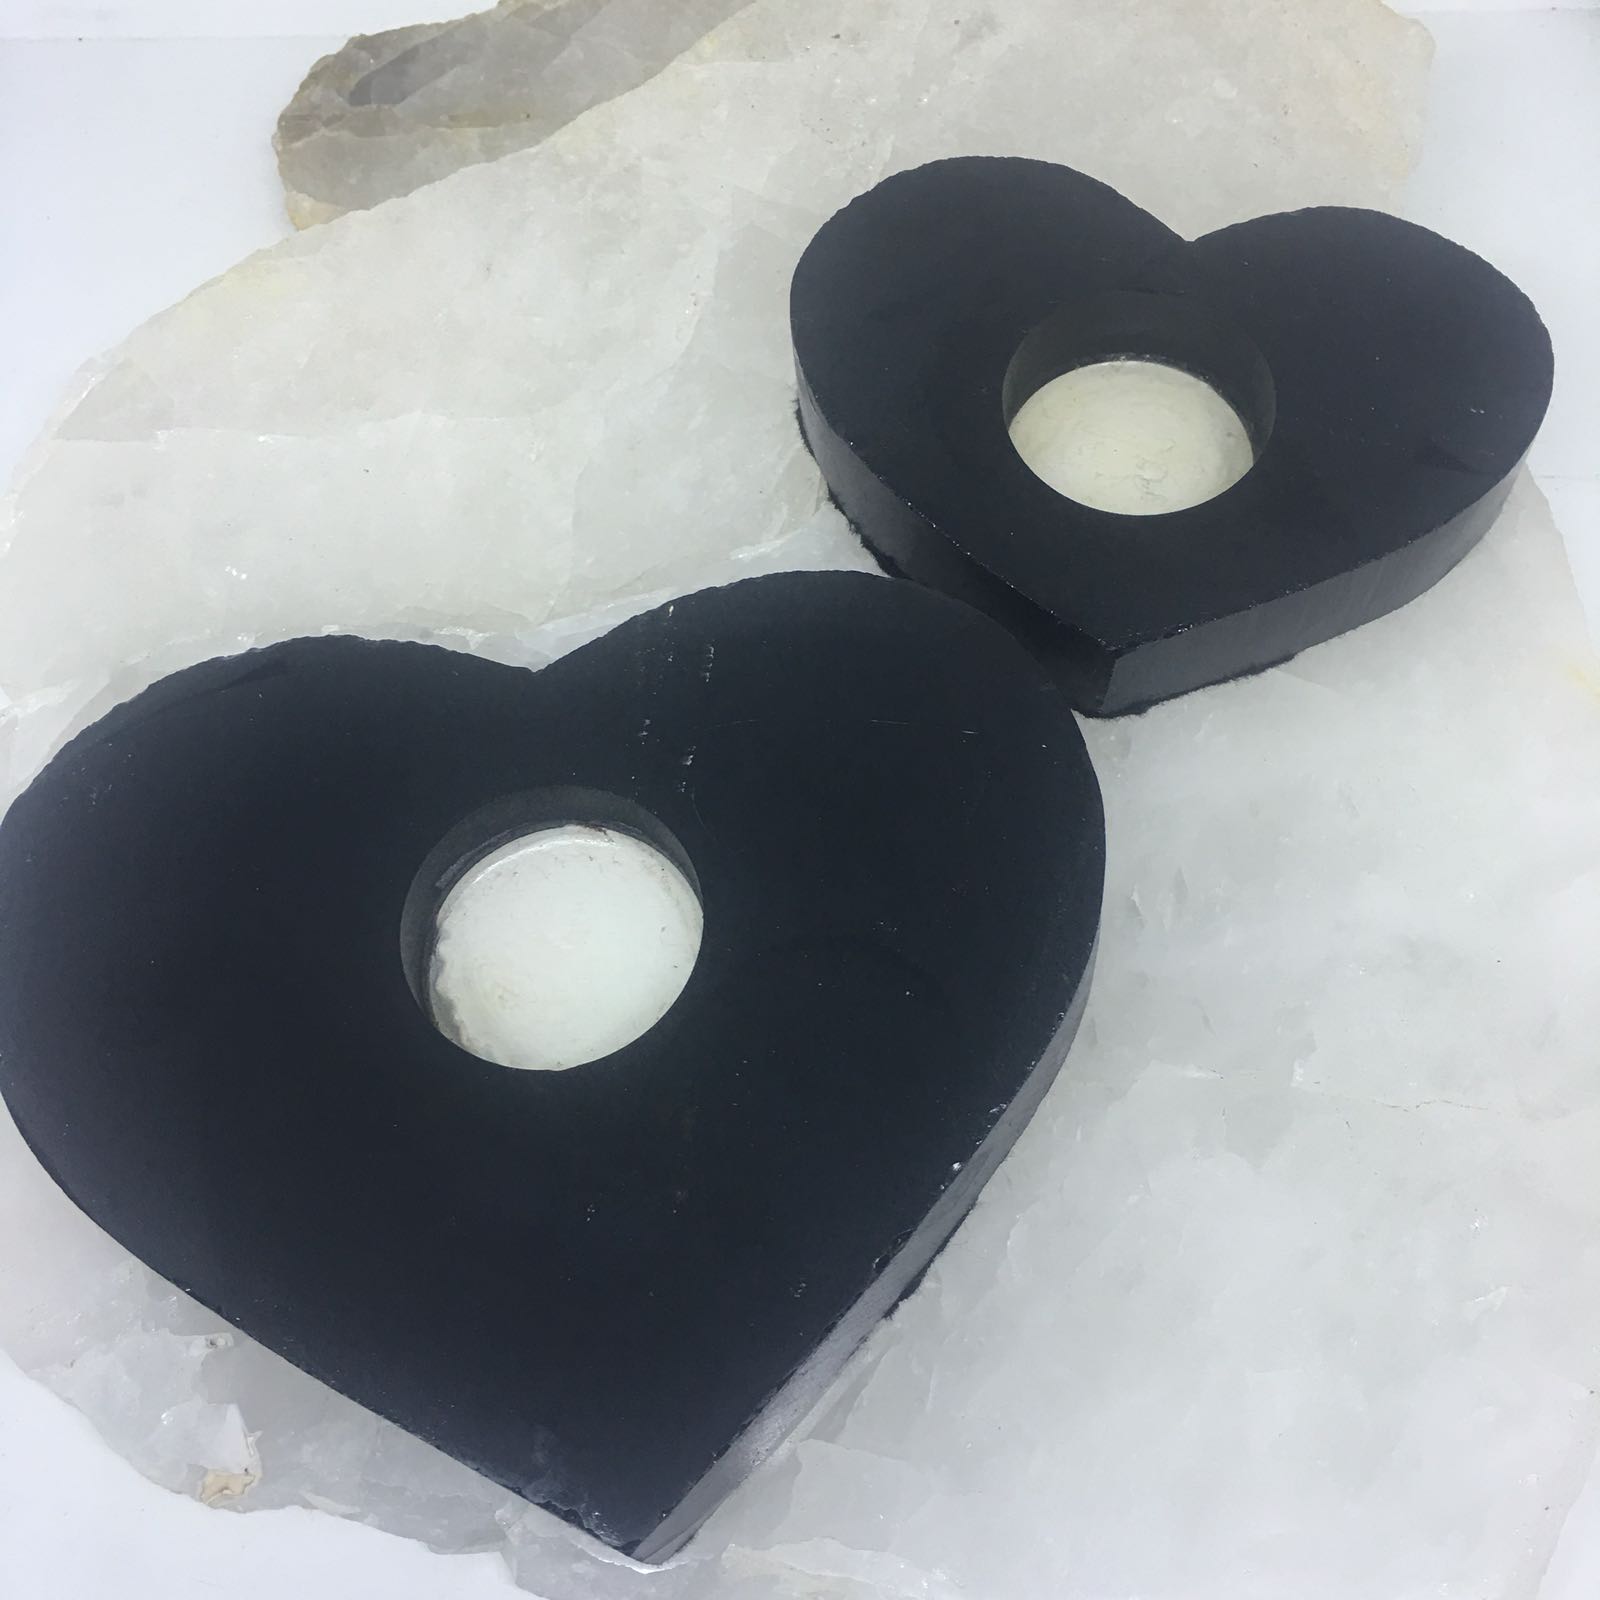 Stones from Uruguay - Black Obsdian Crystal Heart Candle Holder Tealight